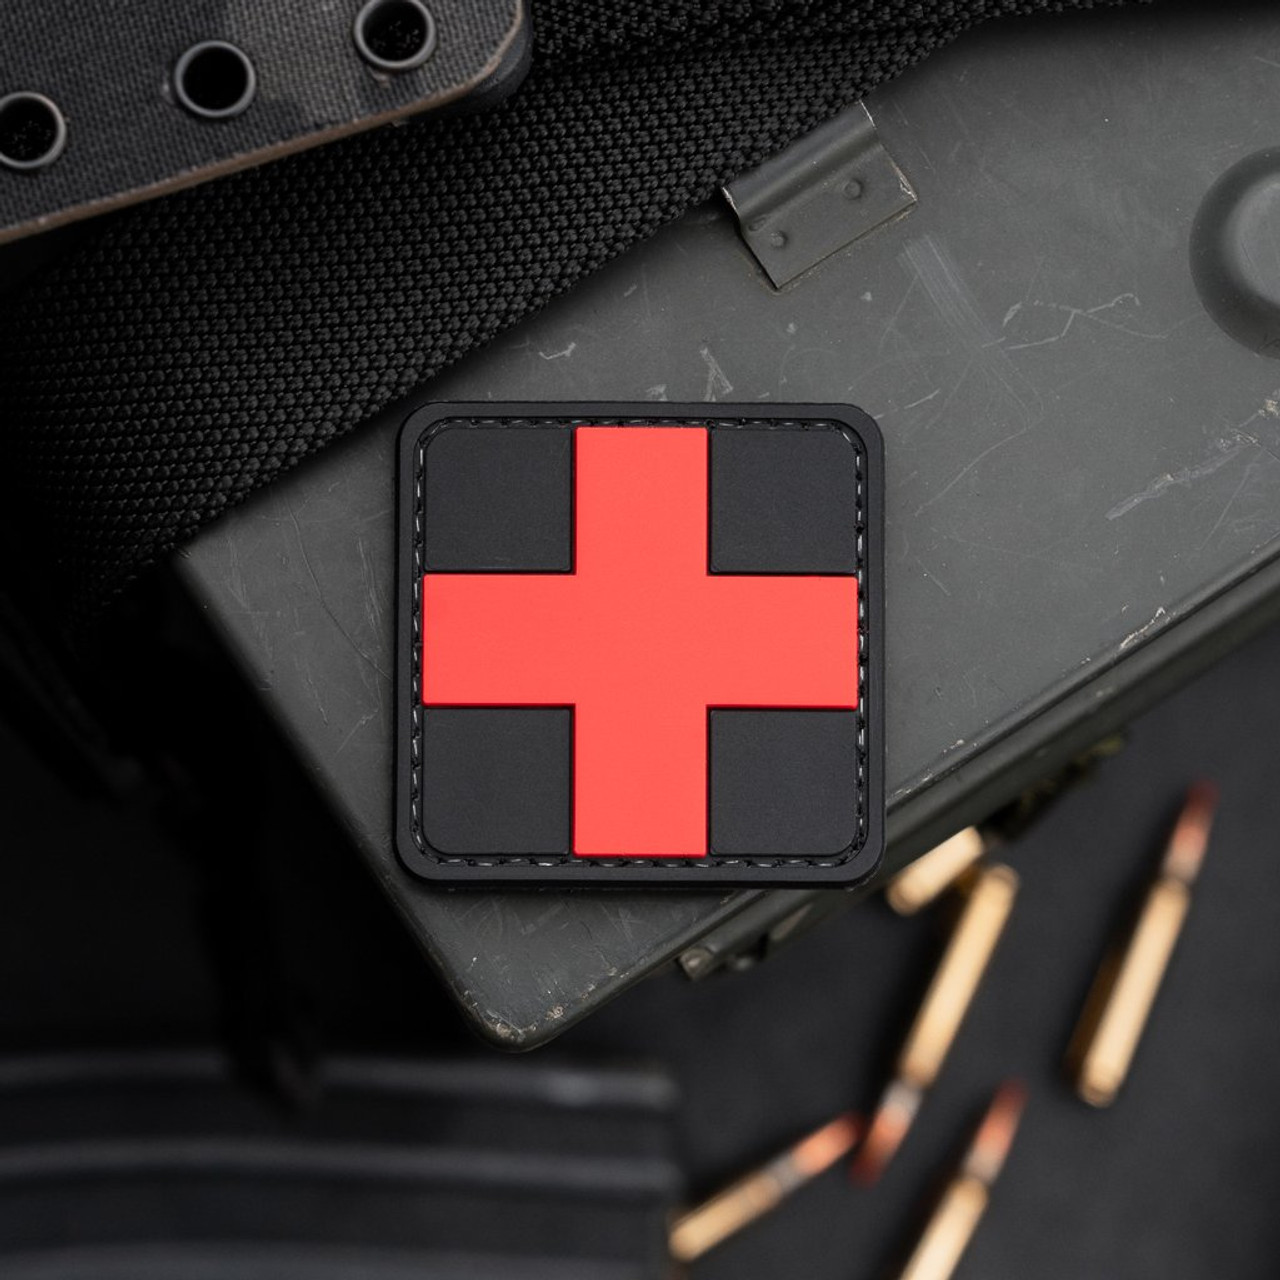 Medic PVC Patch 2 x 2 - NEO Tactical Gear